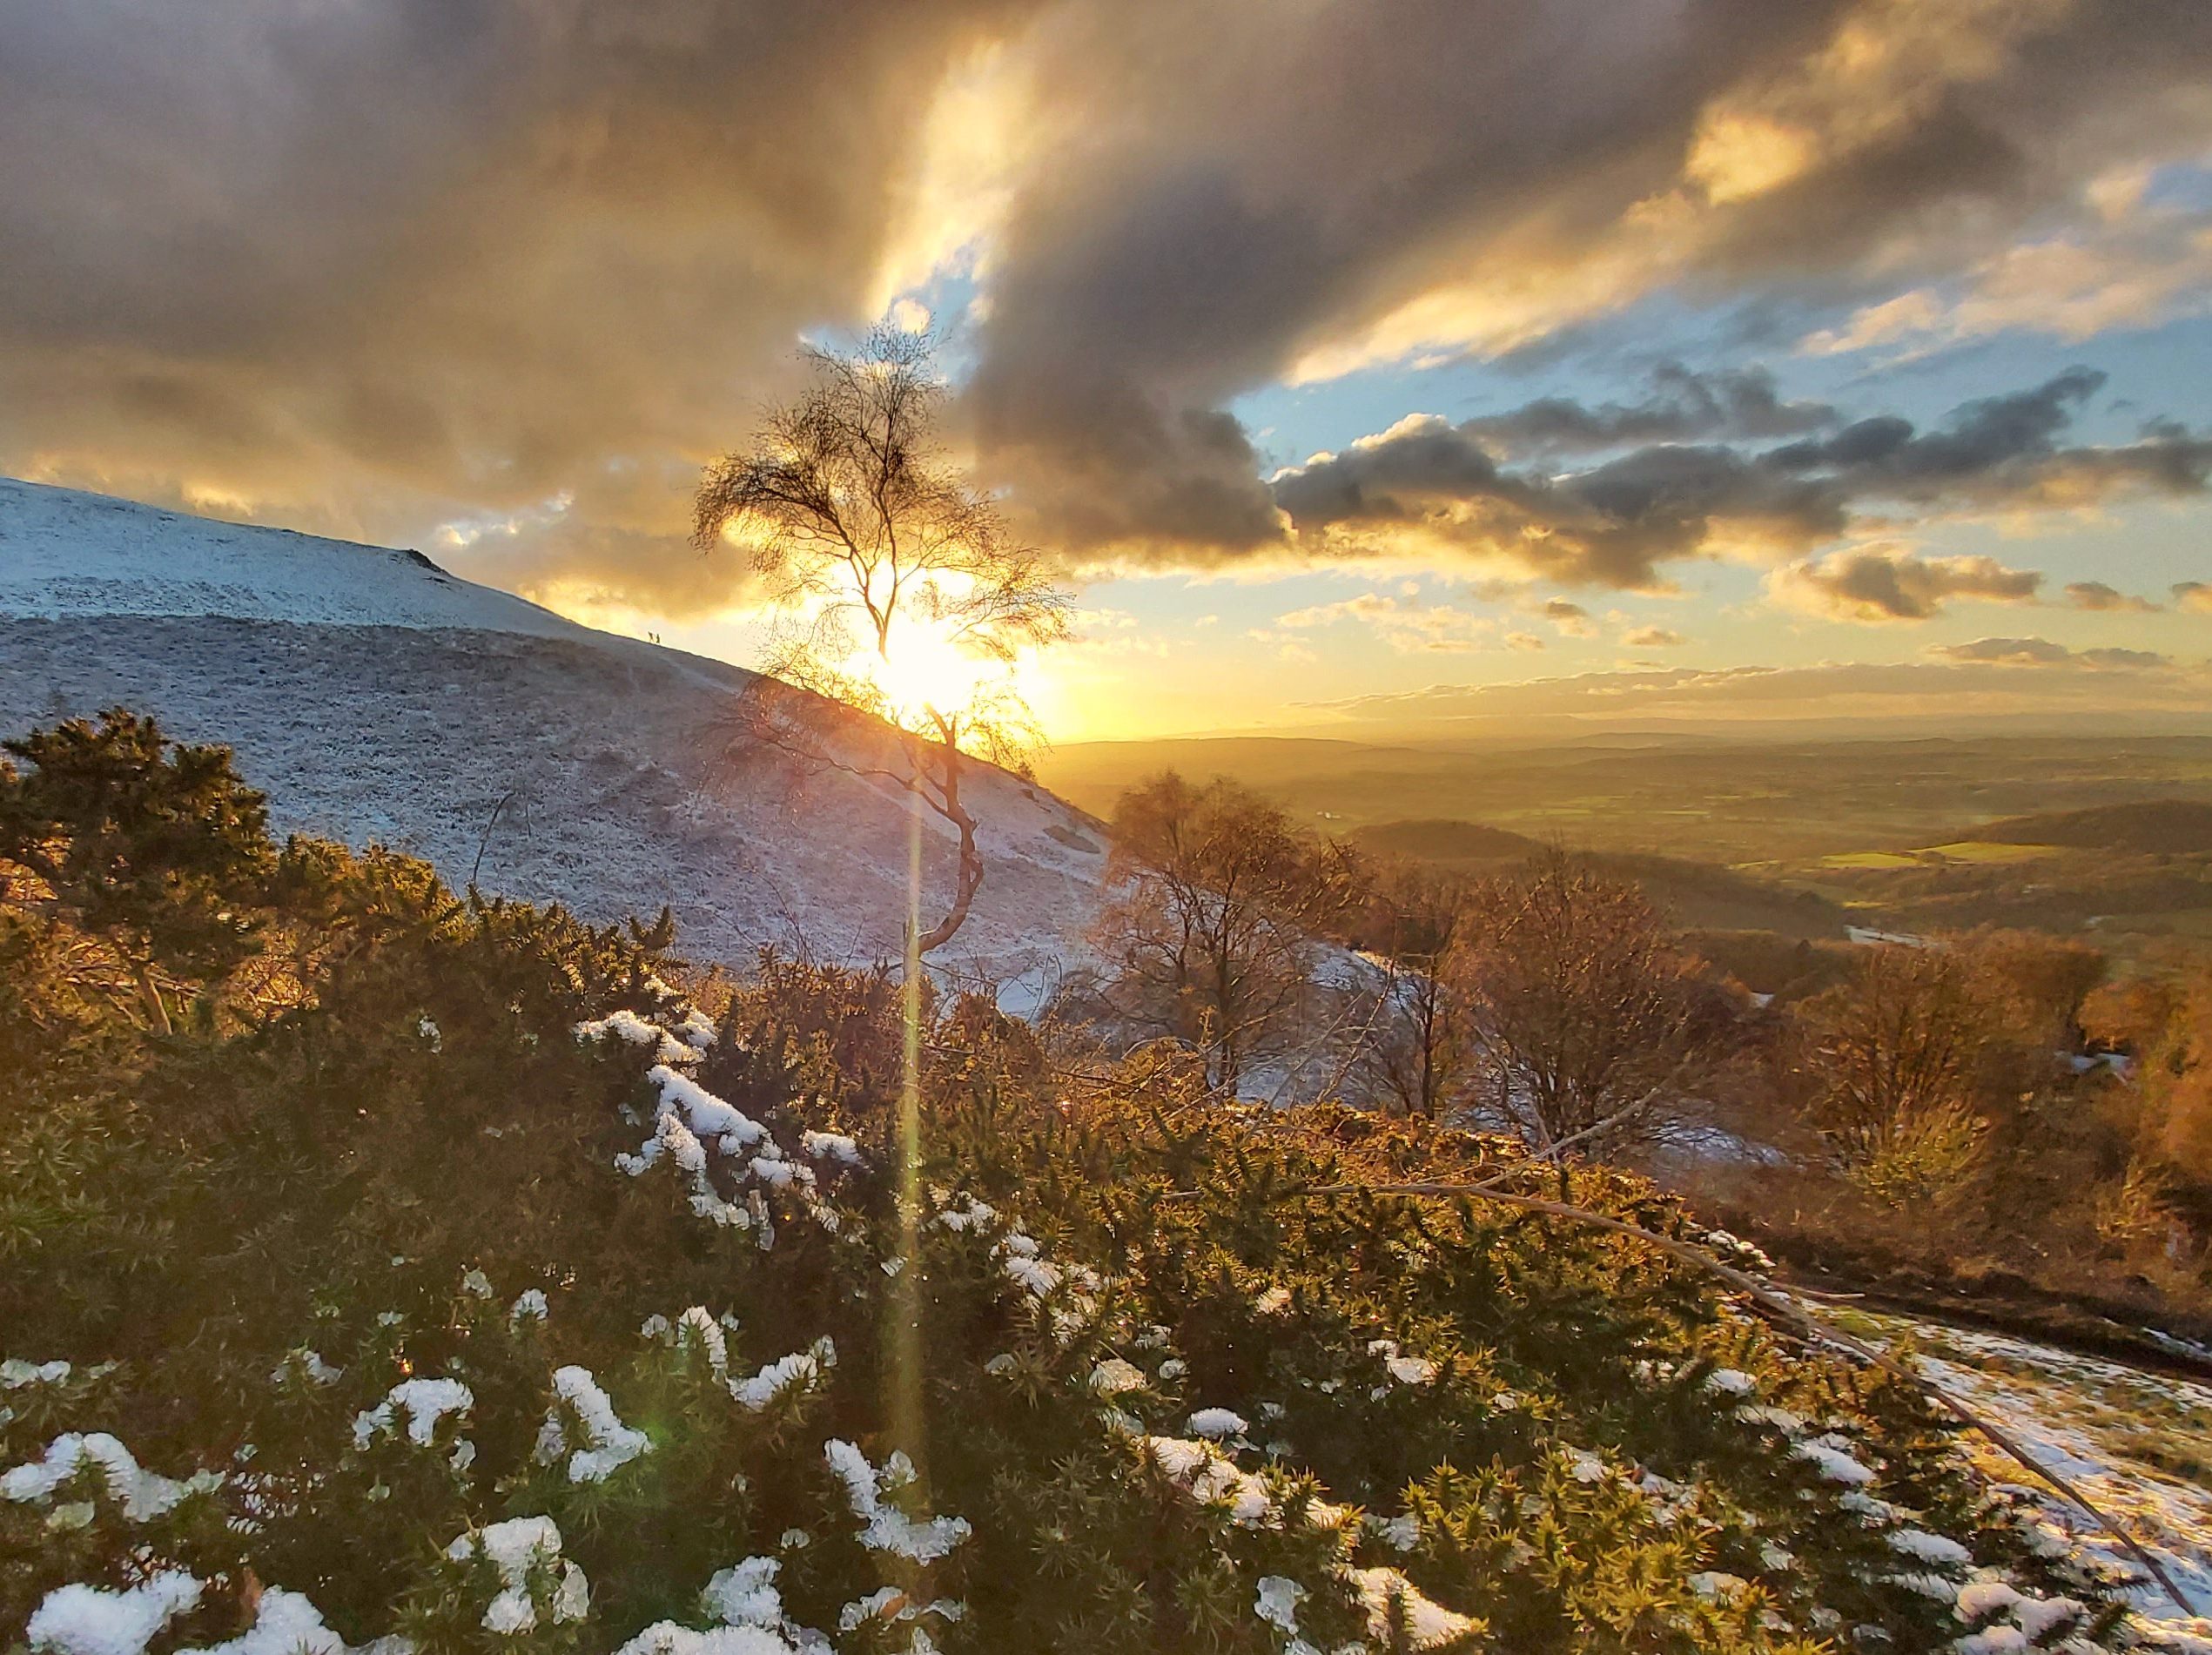 Image of a tree on the Malvern hills with sun behind and a light dusting of snow. Demonstration of why you should Print and Frame Photos Online